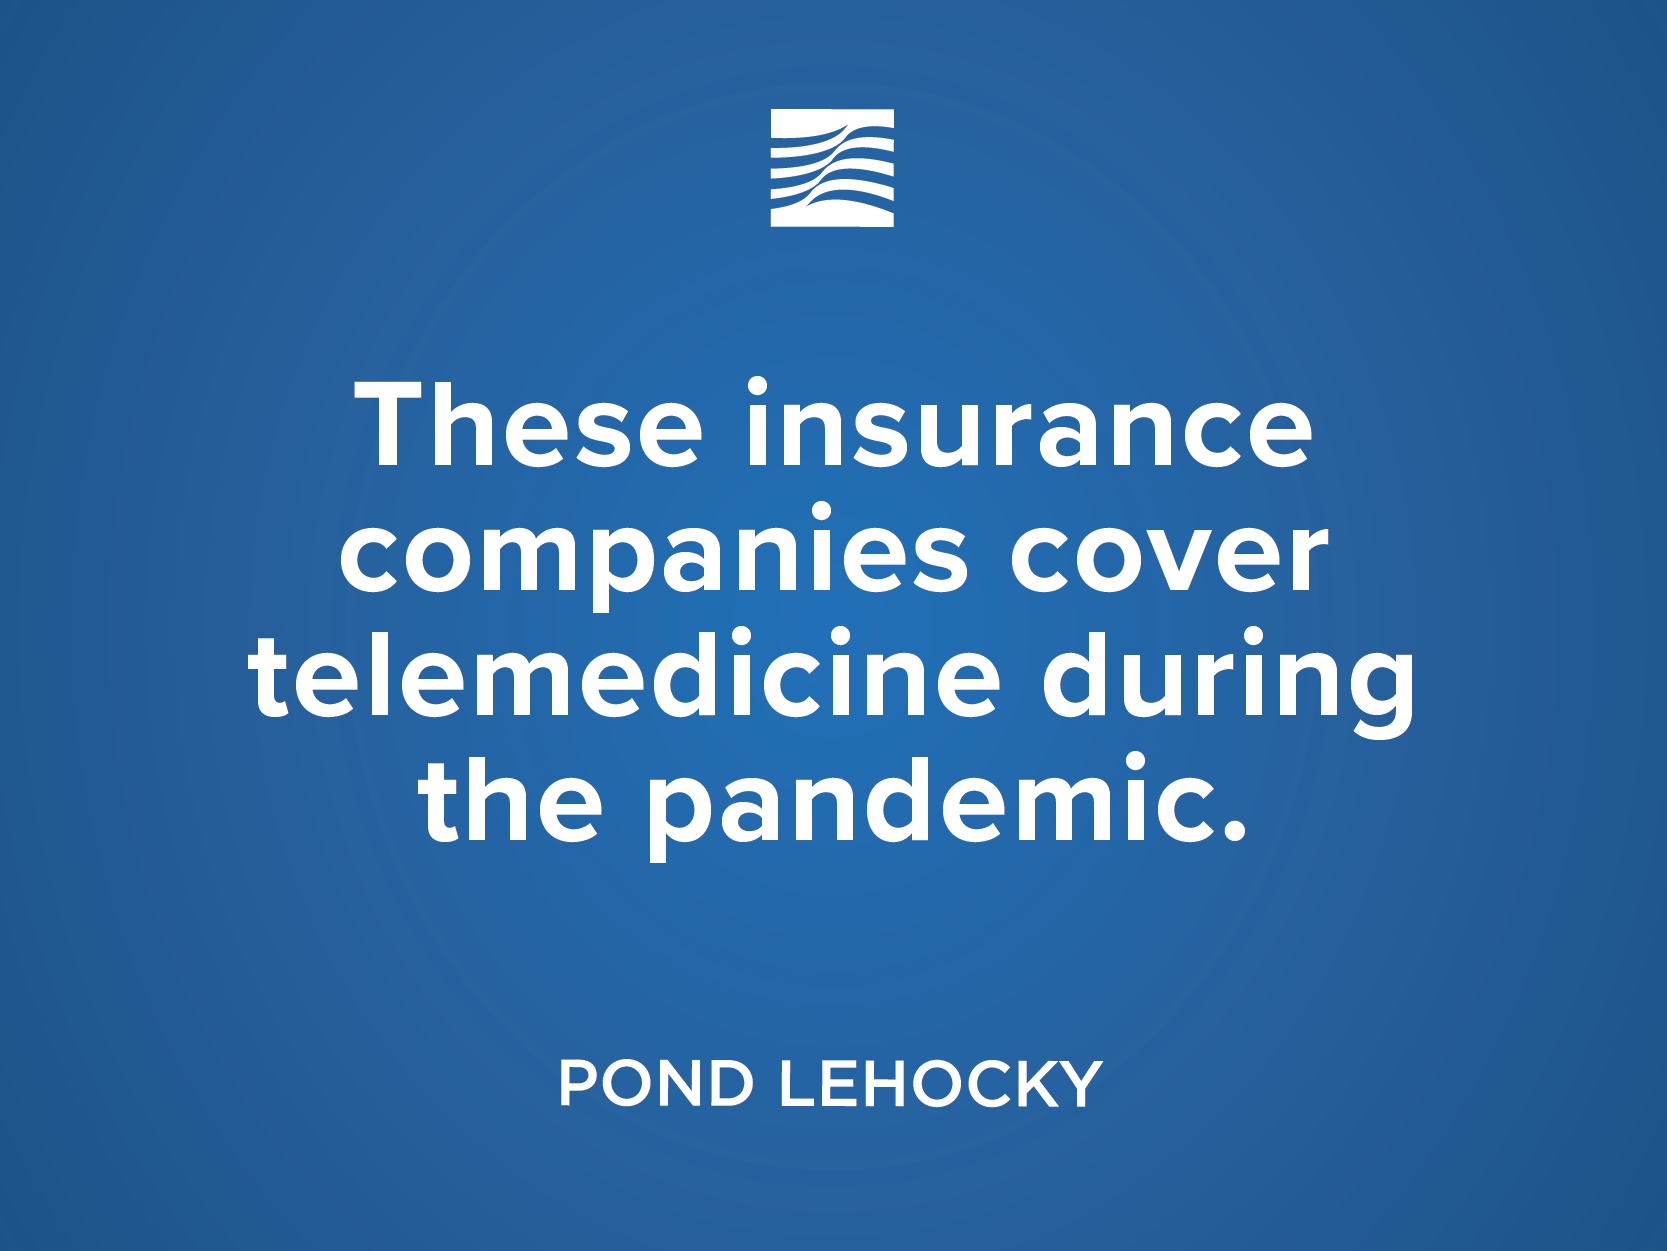 These insurance companies cover telemedicine during the pandemic